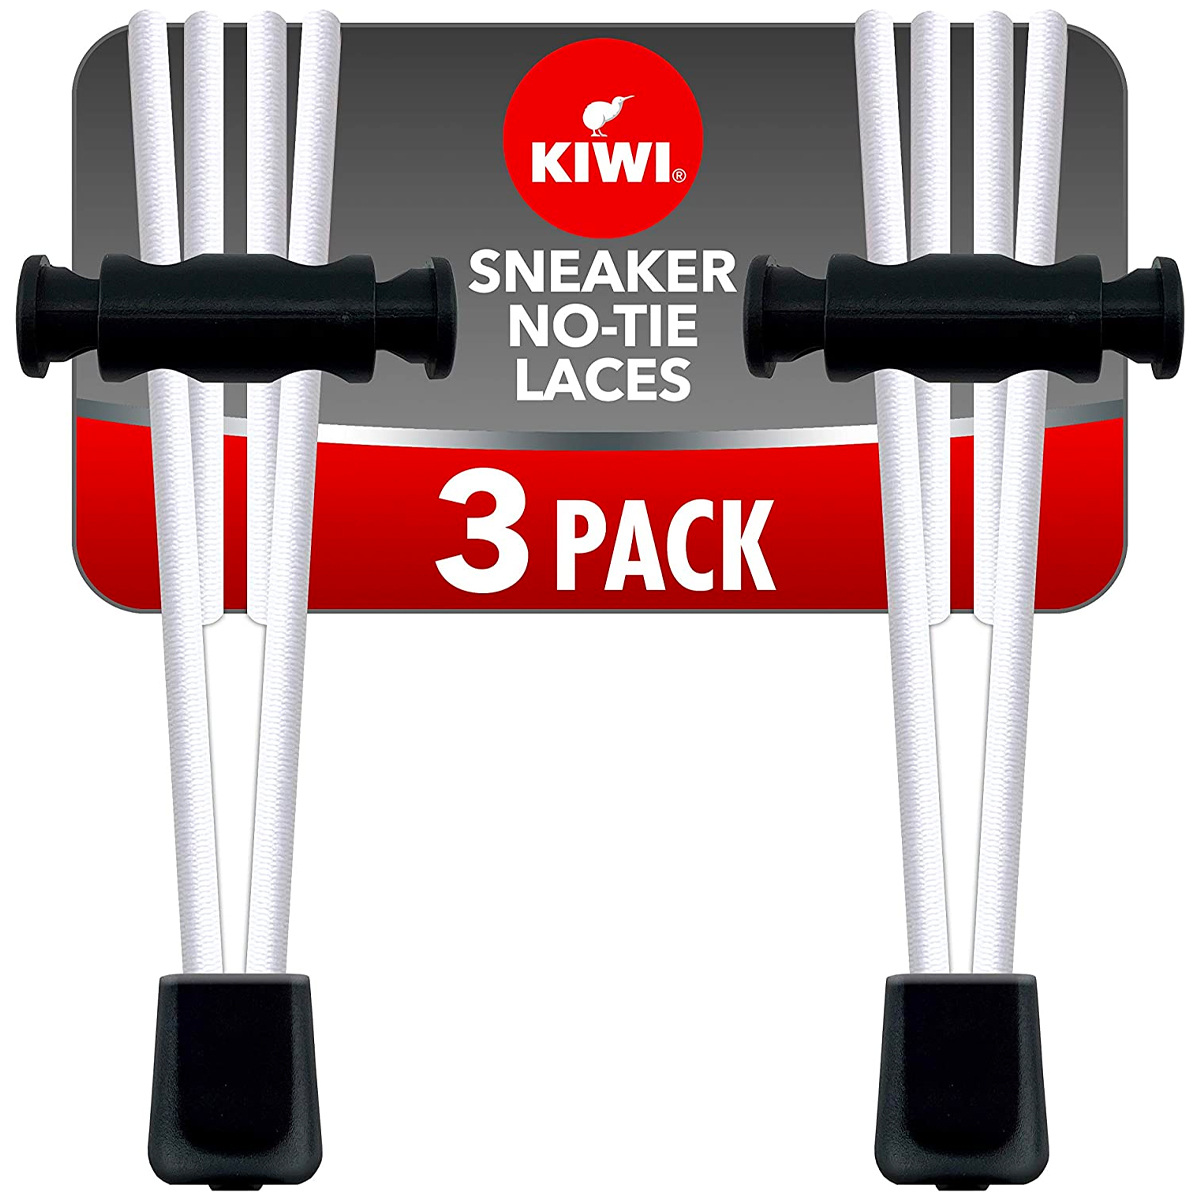 Kiwi Sneaker No-Tie Shoe Laces, White, One Size Fits All, 3 Count (Pack of 1)